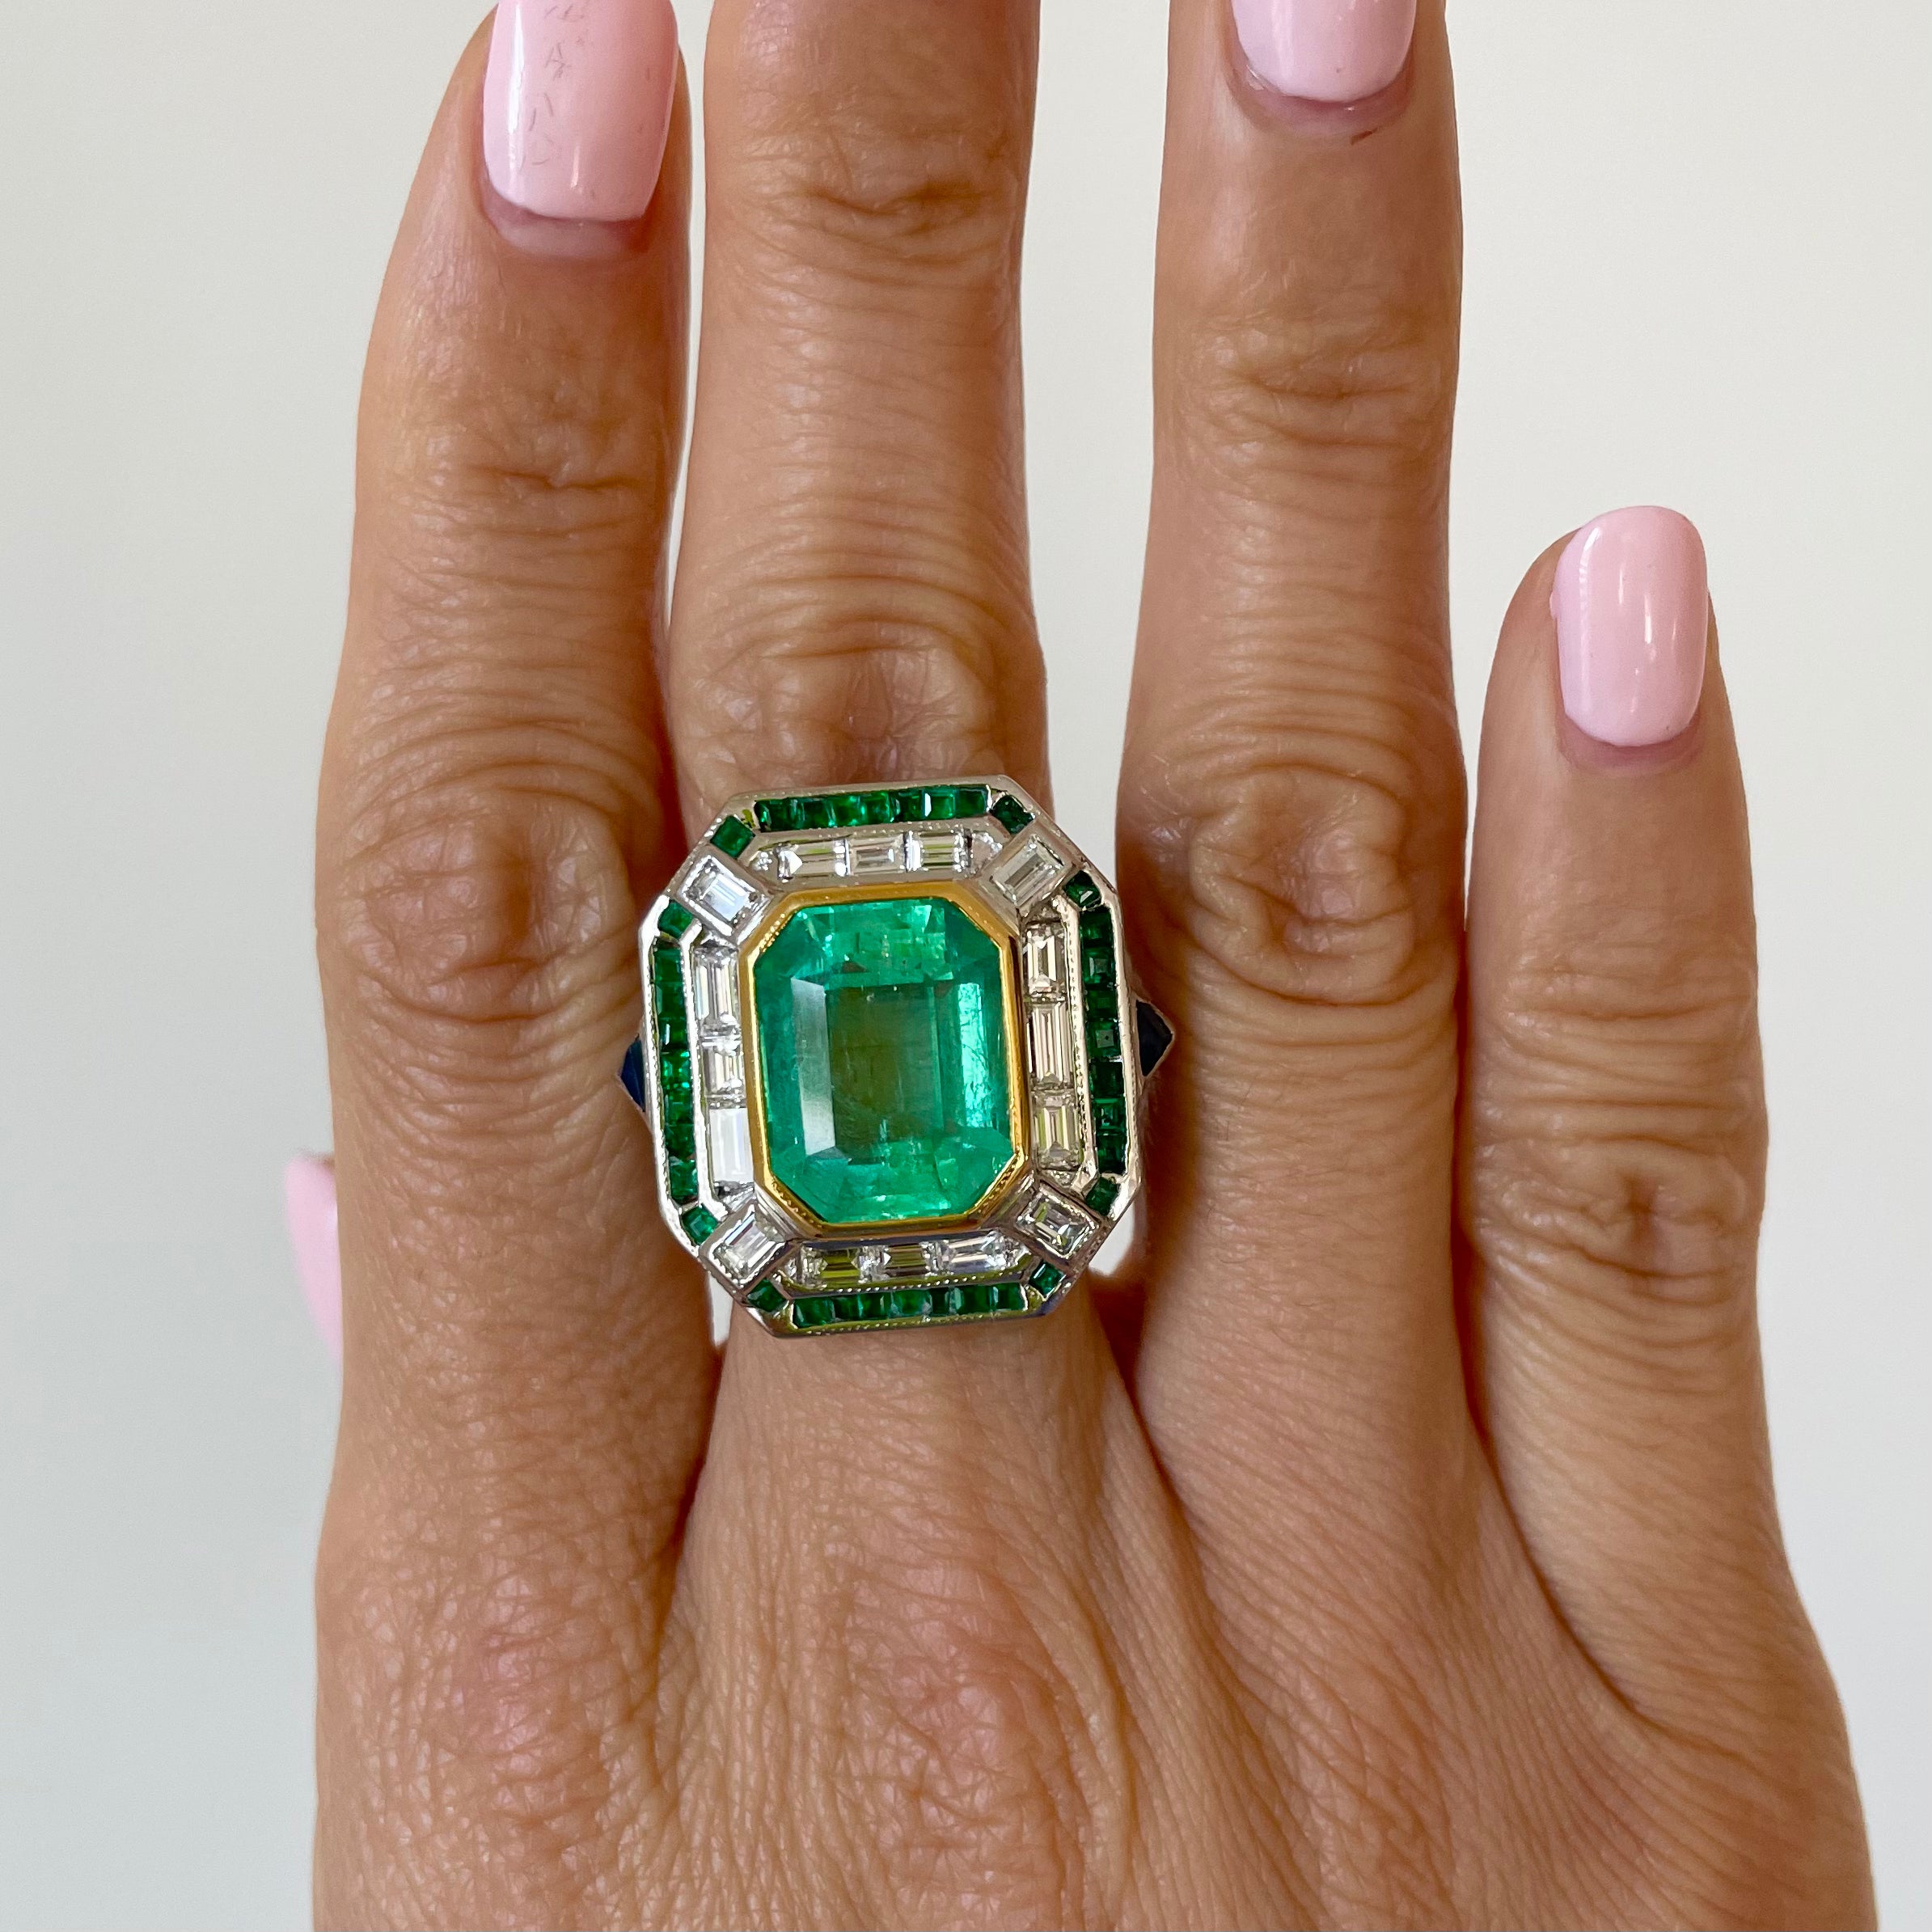 GIA Certified 9.3 ct Colombian Emerald Ring set in 18k yellow and white gold